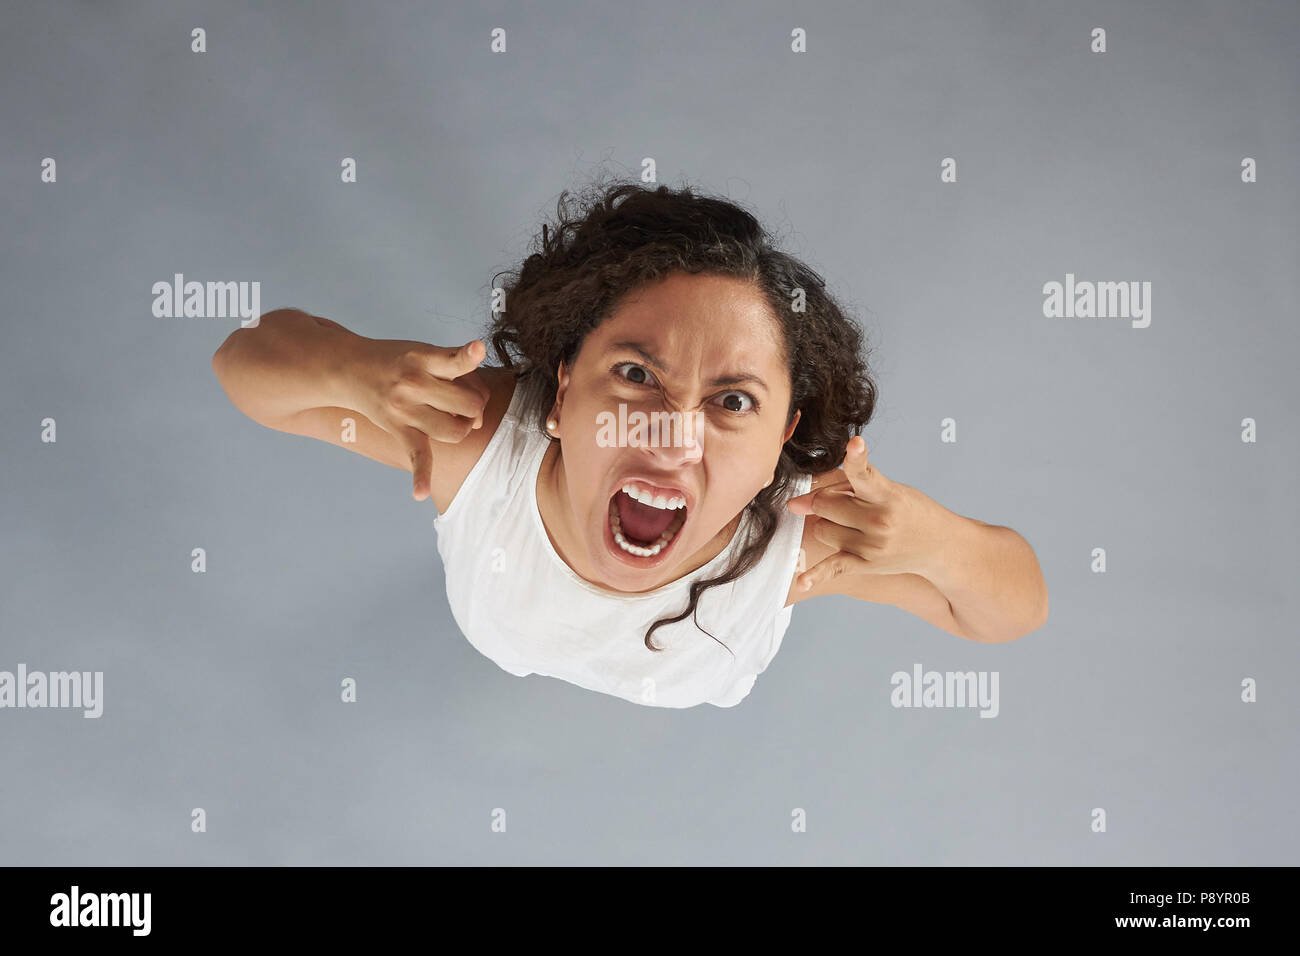 Crazy young woman with angry expression isolated on gray background above top view Stock Photo